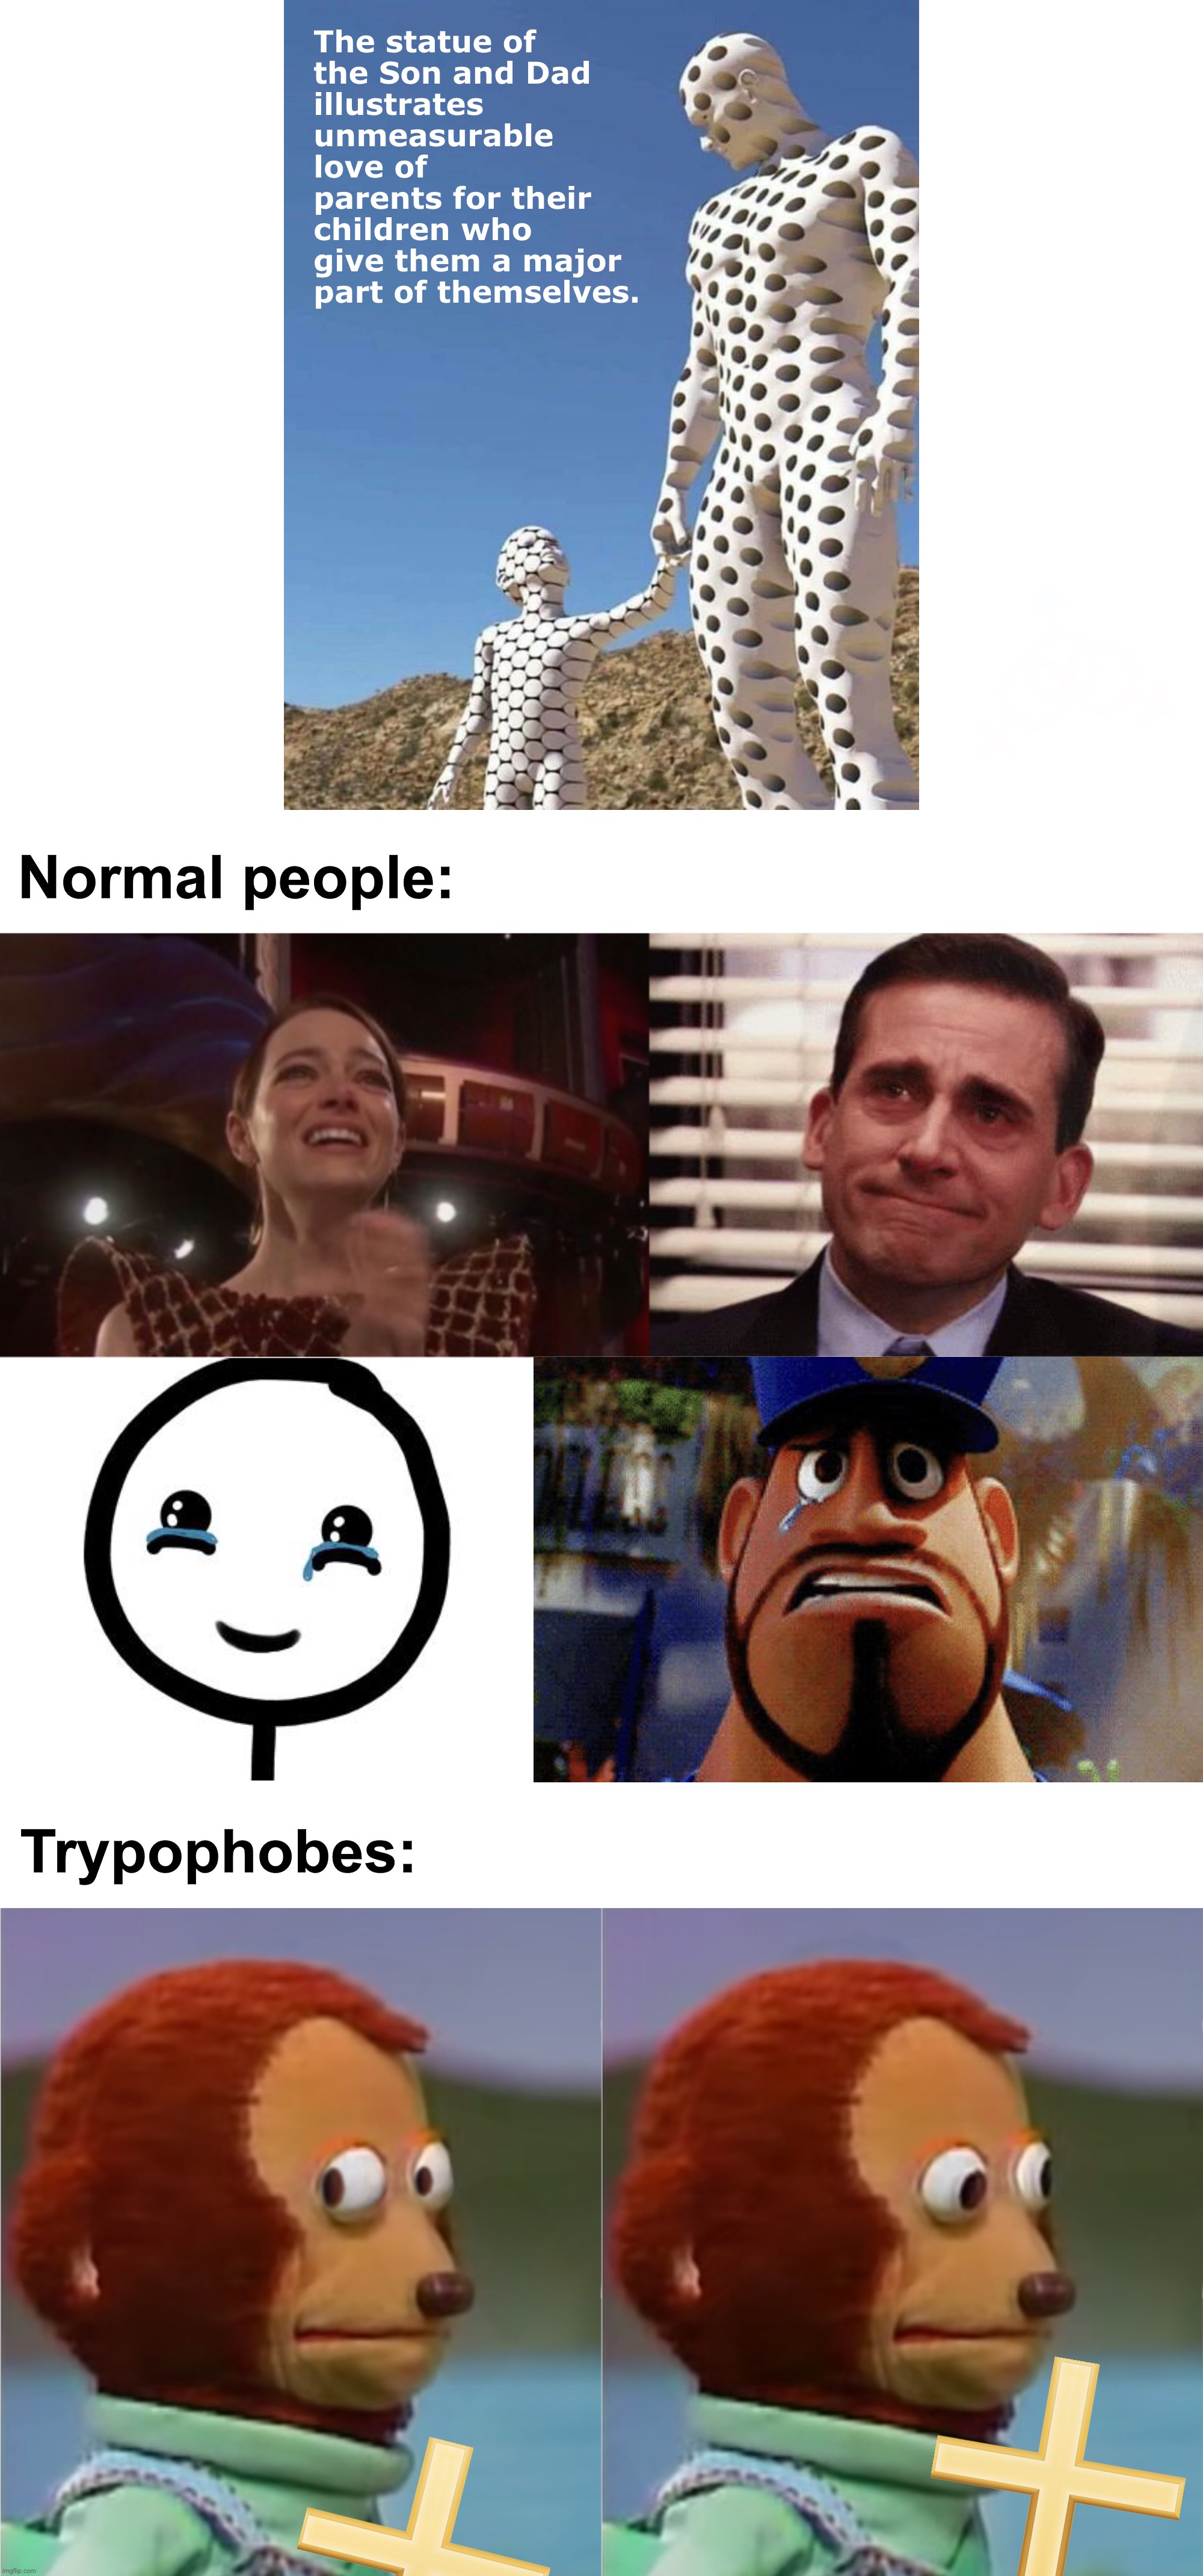 The statue of
the Son and Dad
illustrates unmeasurable love of parents for their children who give them a major part of themselves. Normal people:; Trypophobes: | image tagged in tears of joy,puppet monkey,dad and son,parents,trypophobia,memes | made w/ Imgflip meme maker